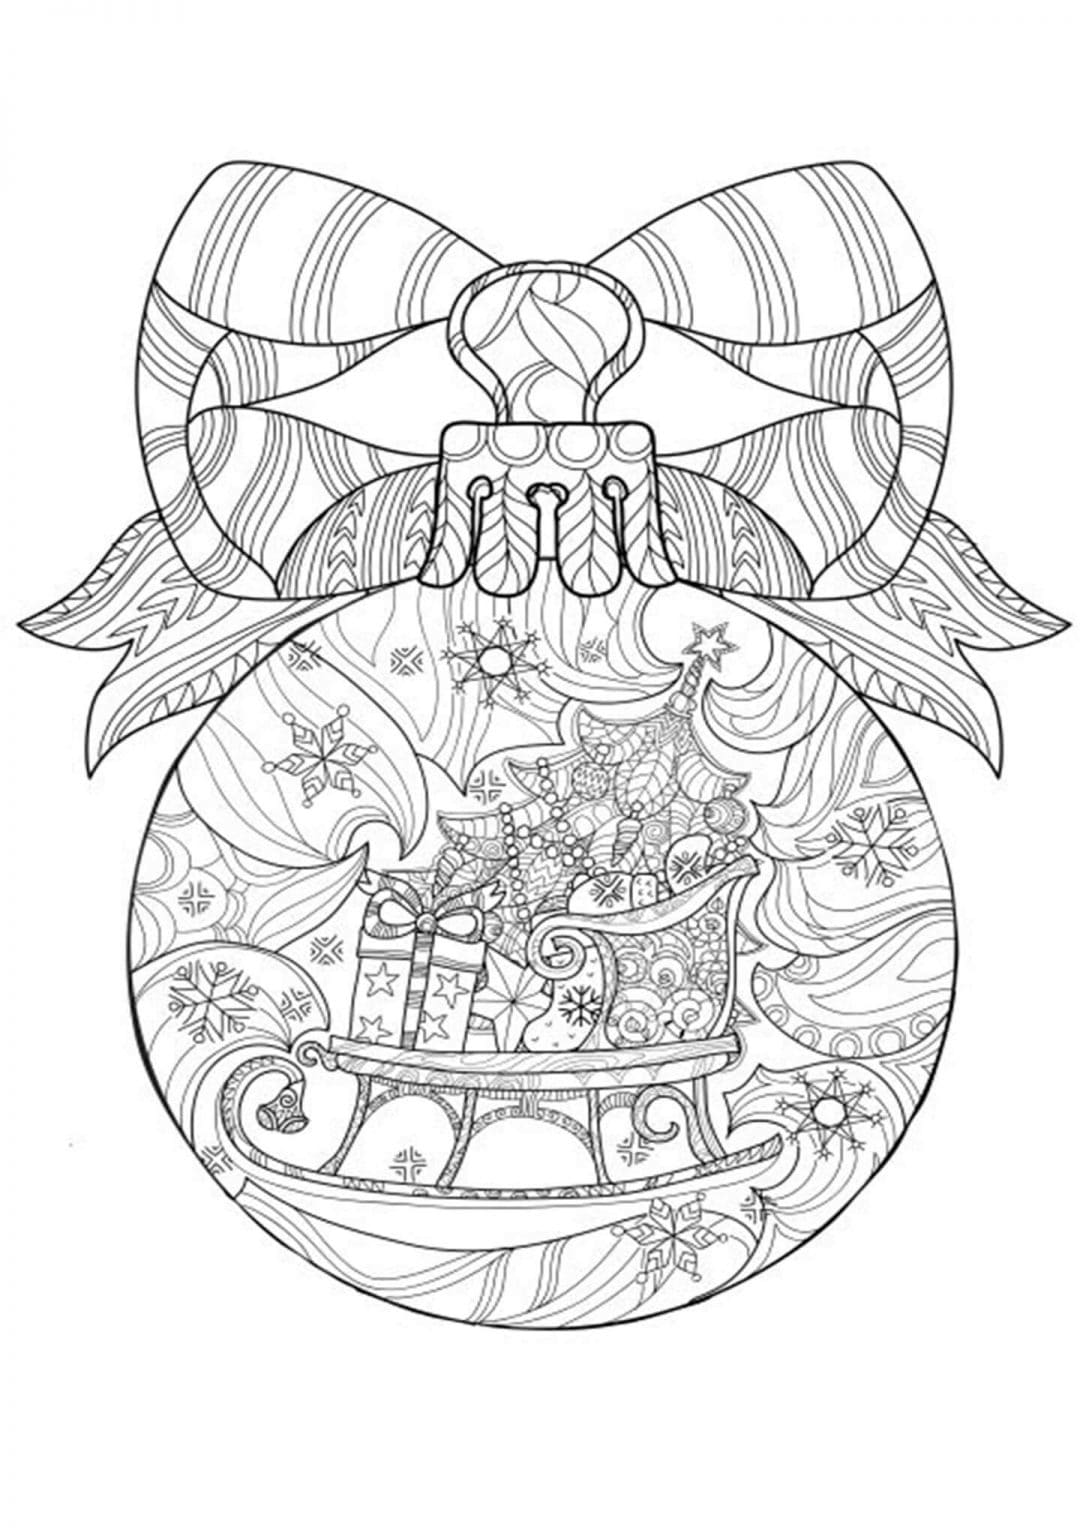 20 Free Christmas Coloring Pages for Adults in 20   Happier Human